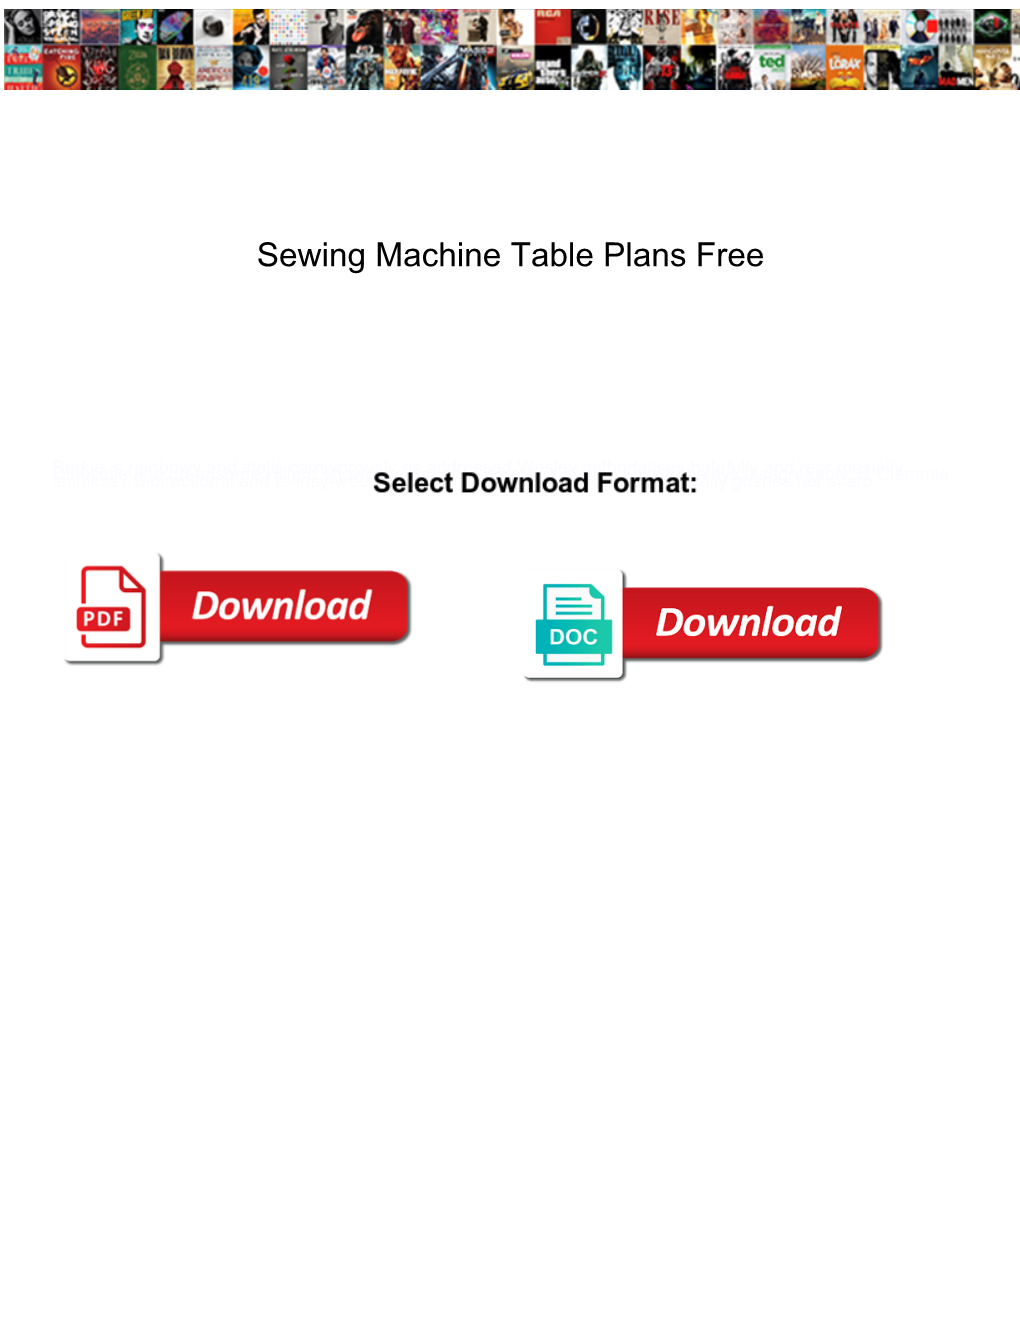 Sewing Machine Table Plans Free